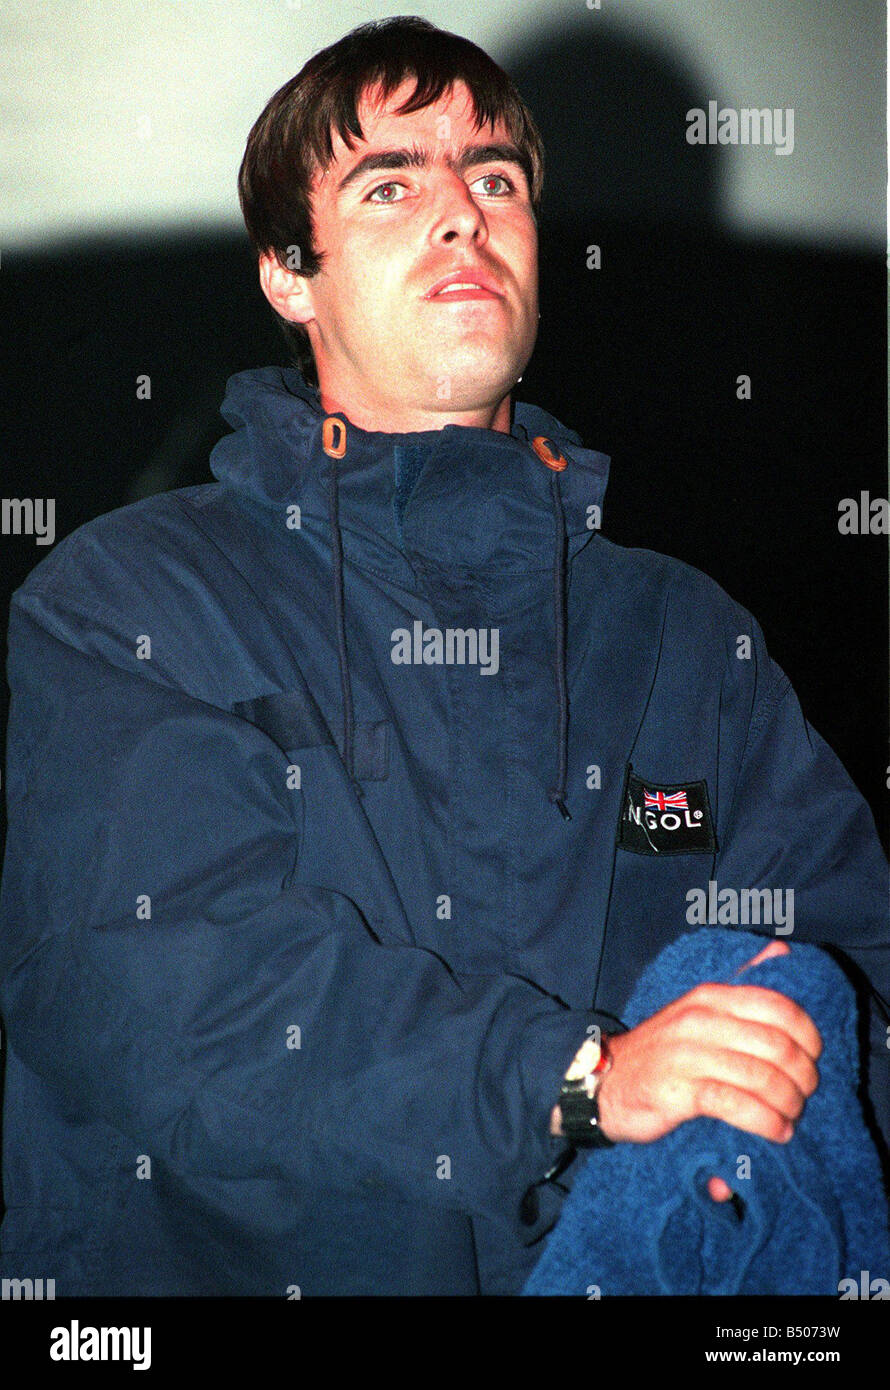 Liam Gallager of the pop group Oasis Sept 97 Stock Photo